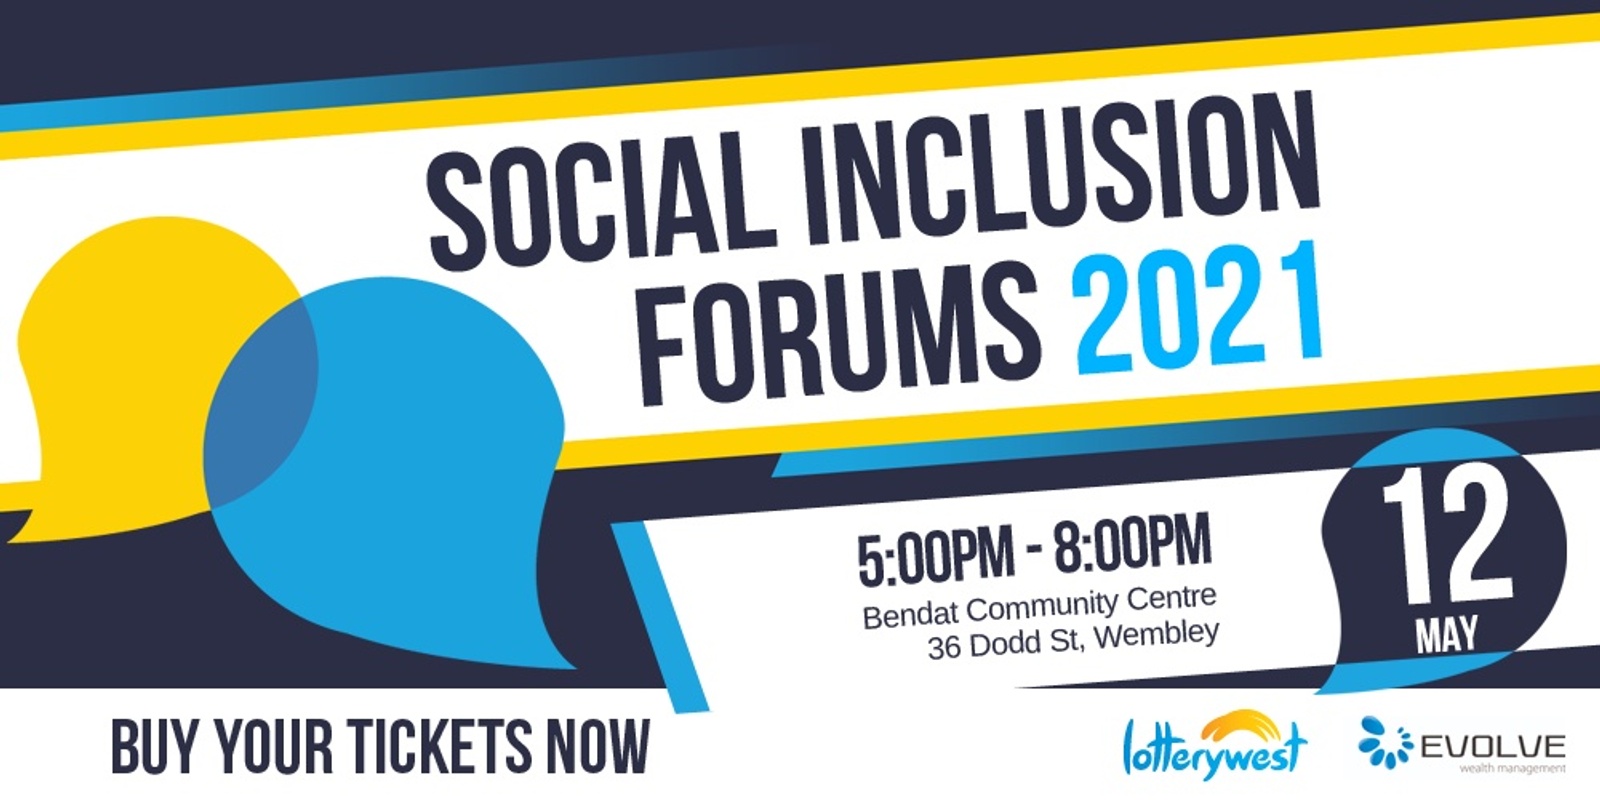 Banner image for Social Inclusion Forum